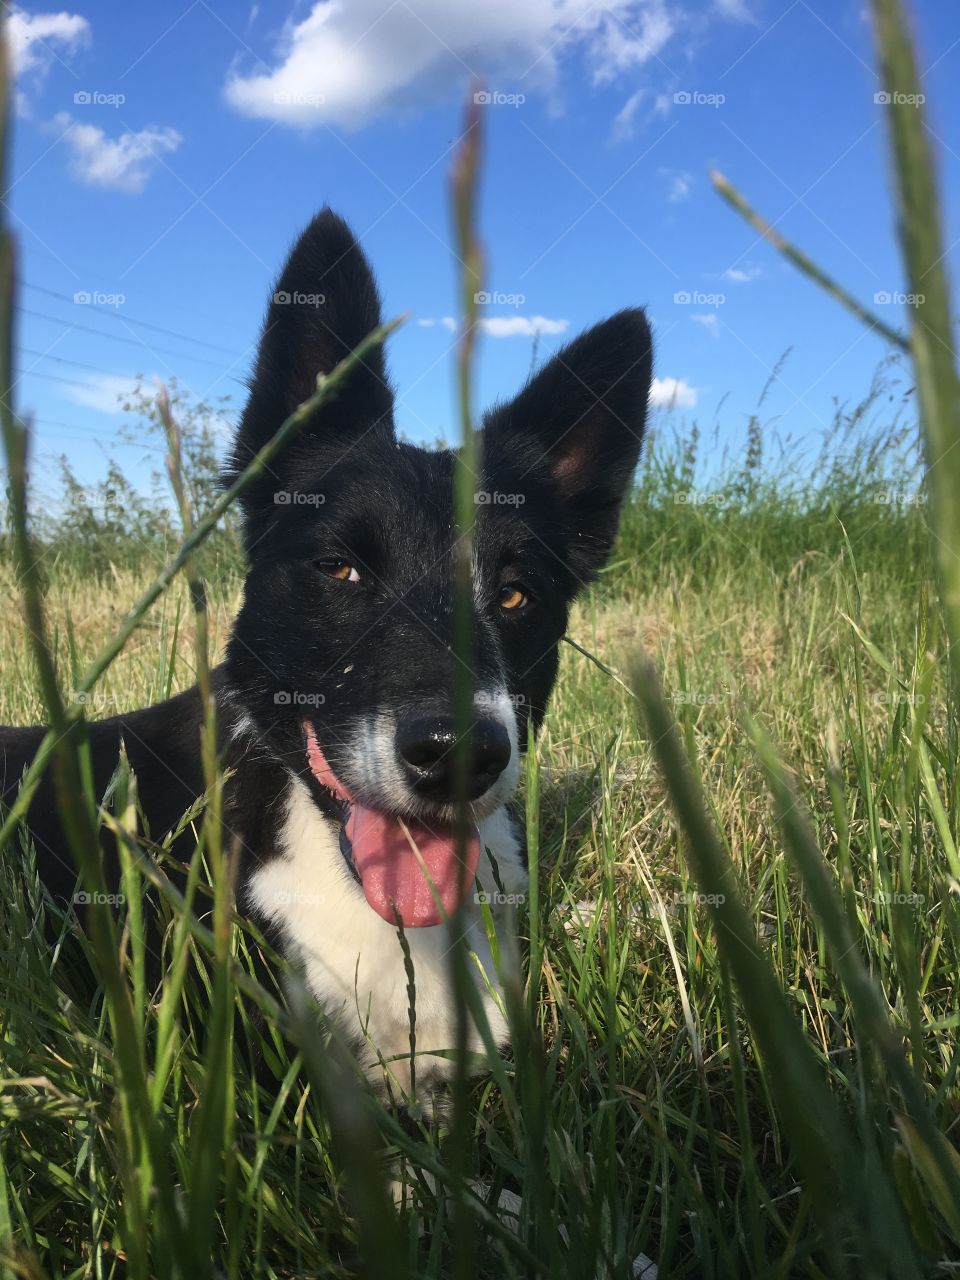 Beautiful shot of a collie lying down among grasses her ears are large and there is an amazing blue sky behind her